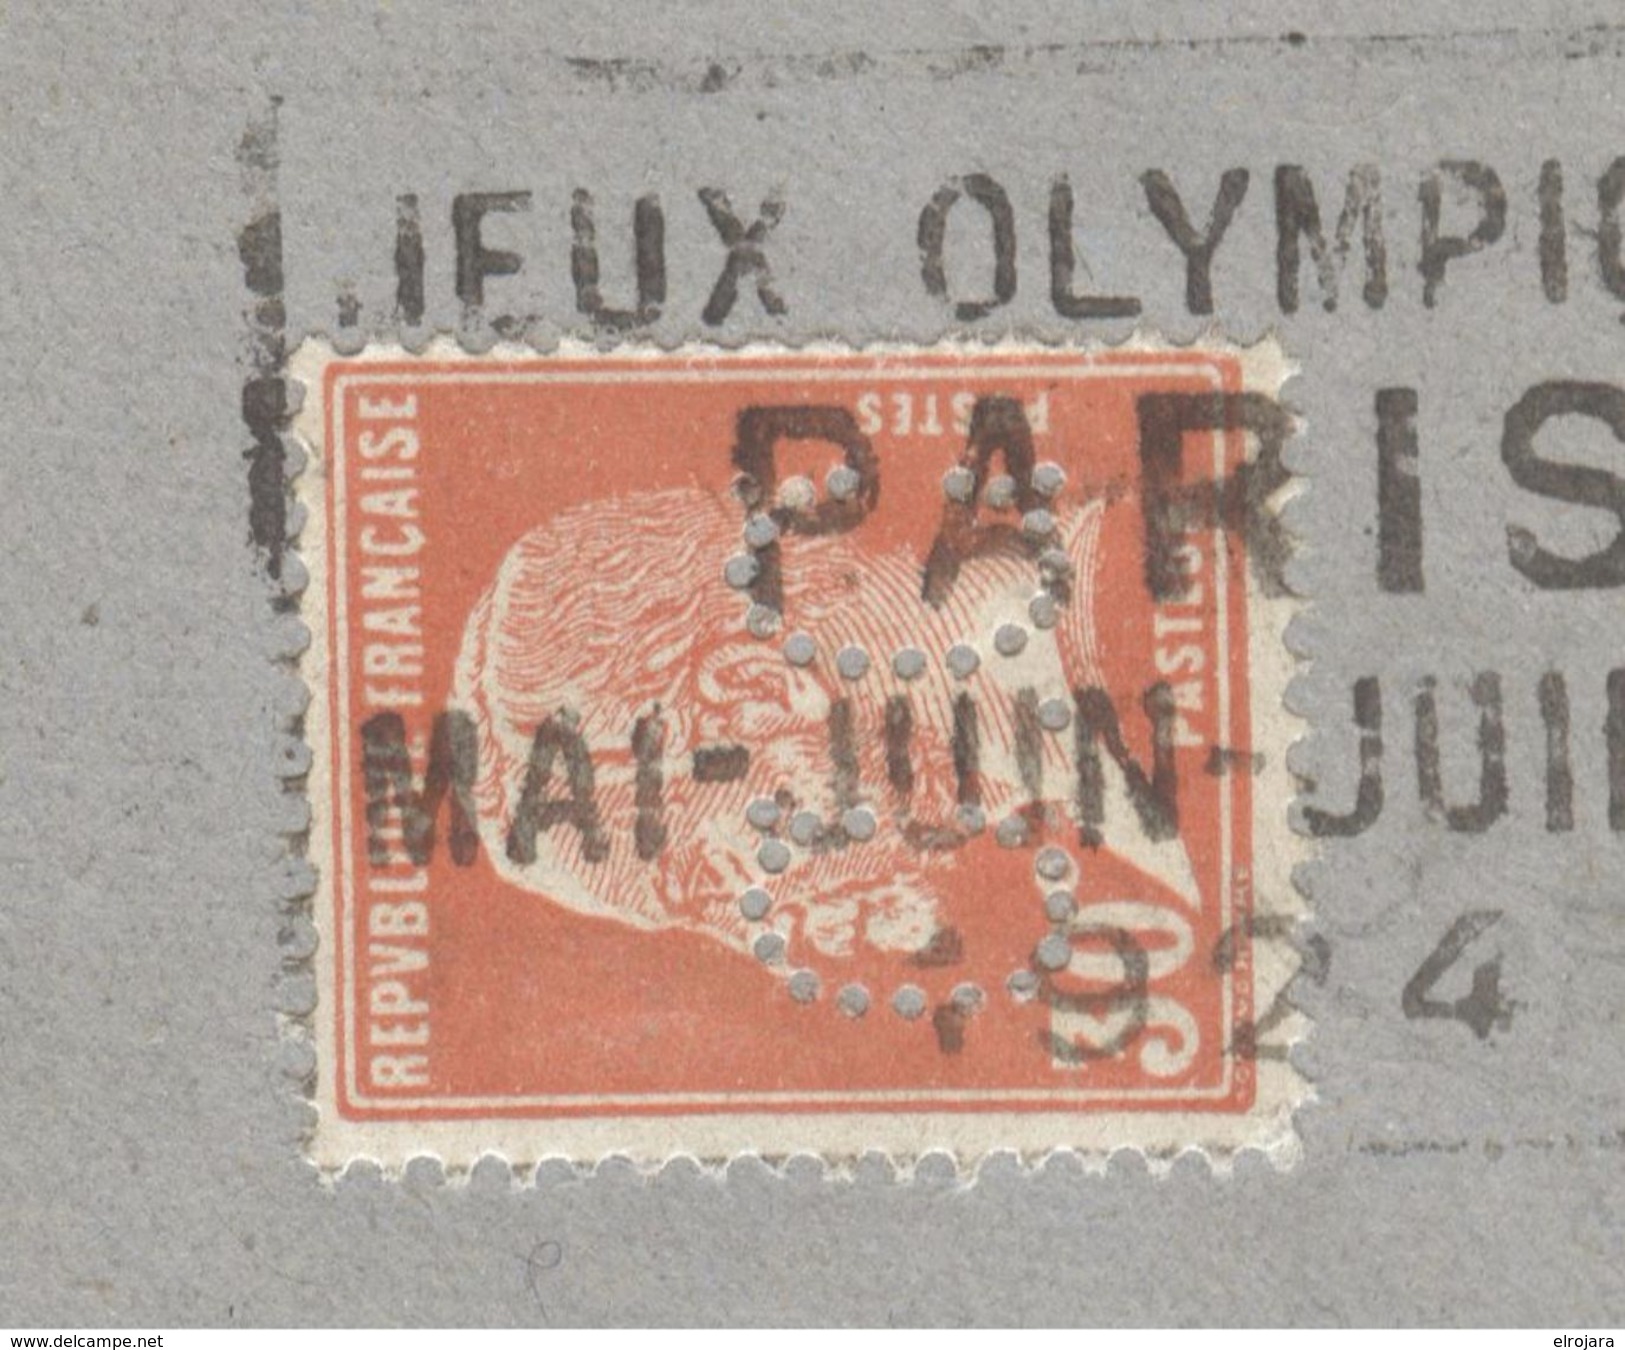 FRANCE PERFIN Stamp On Cover With Olympic Machine Cancel Paris Depart 24 VI 1924 To Switzerland - Ete 1924: Paris